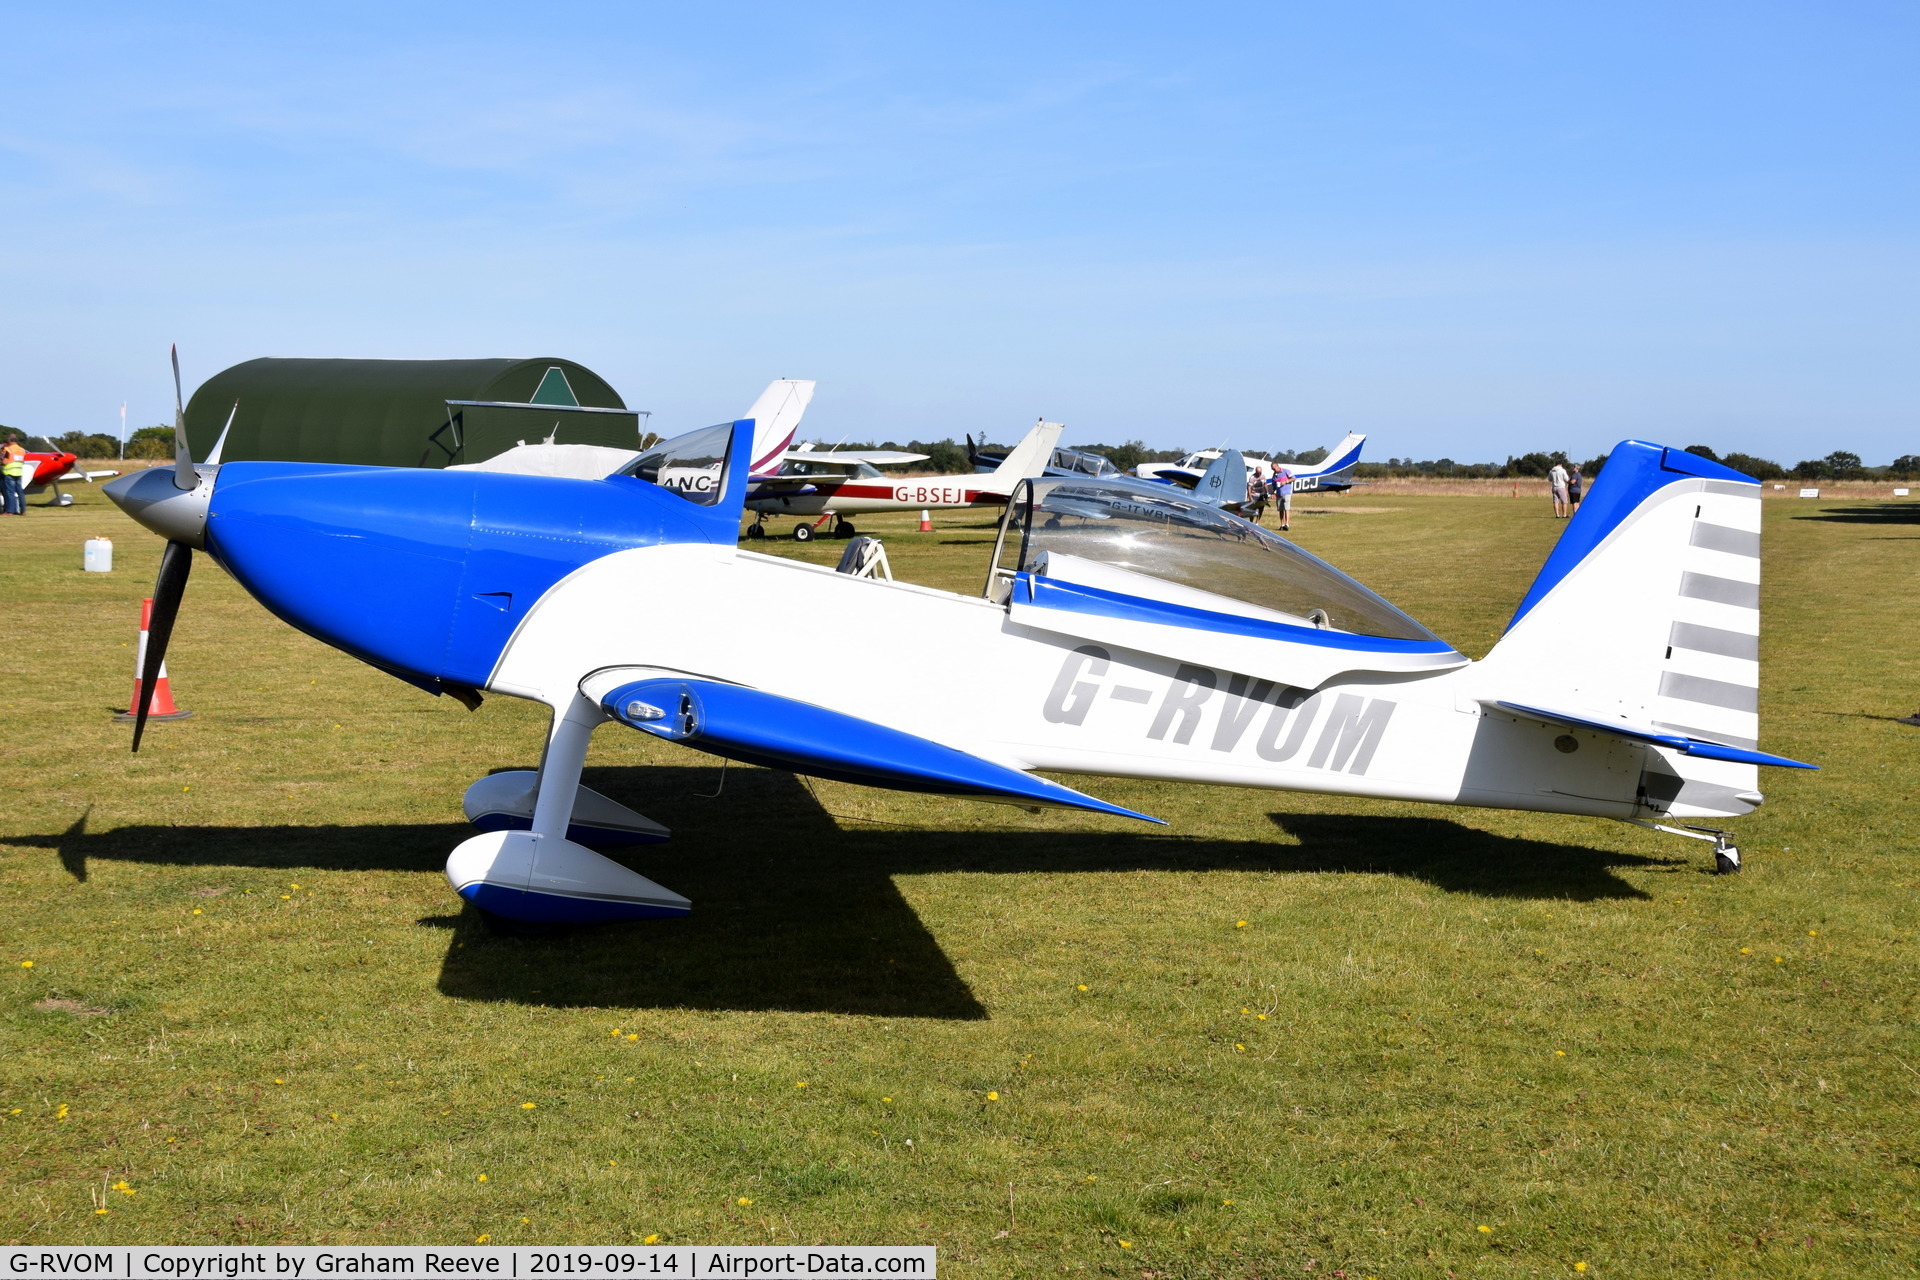 G-RVOM, 2013 Vans RV-8 C/N LAA 303-14894, Parked at Just landed at, Bury St Edmunds, Rougham Airfield, UK.